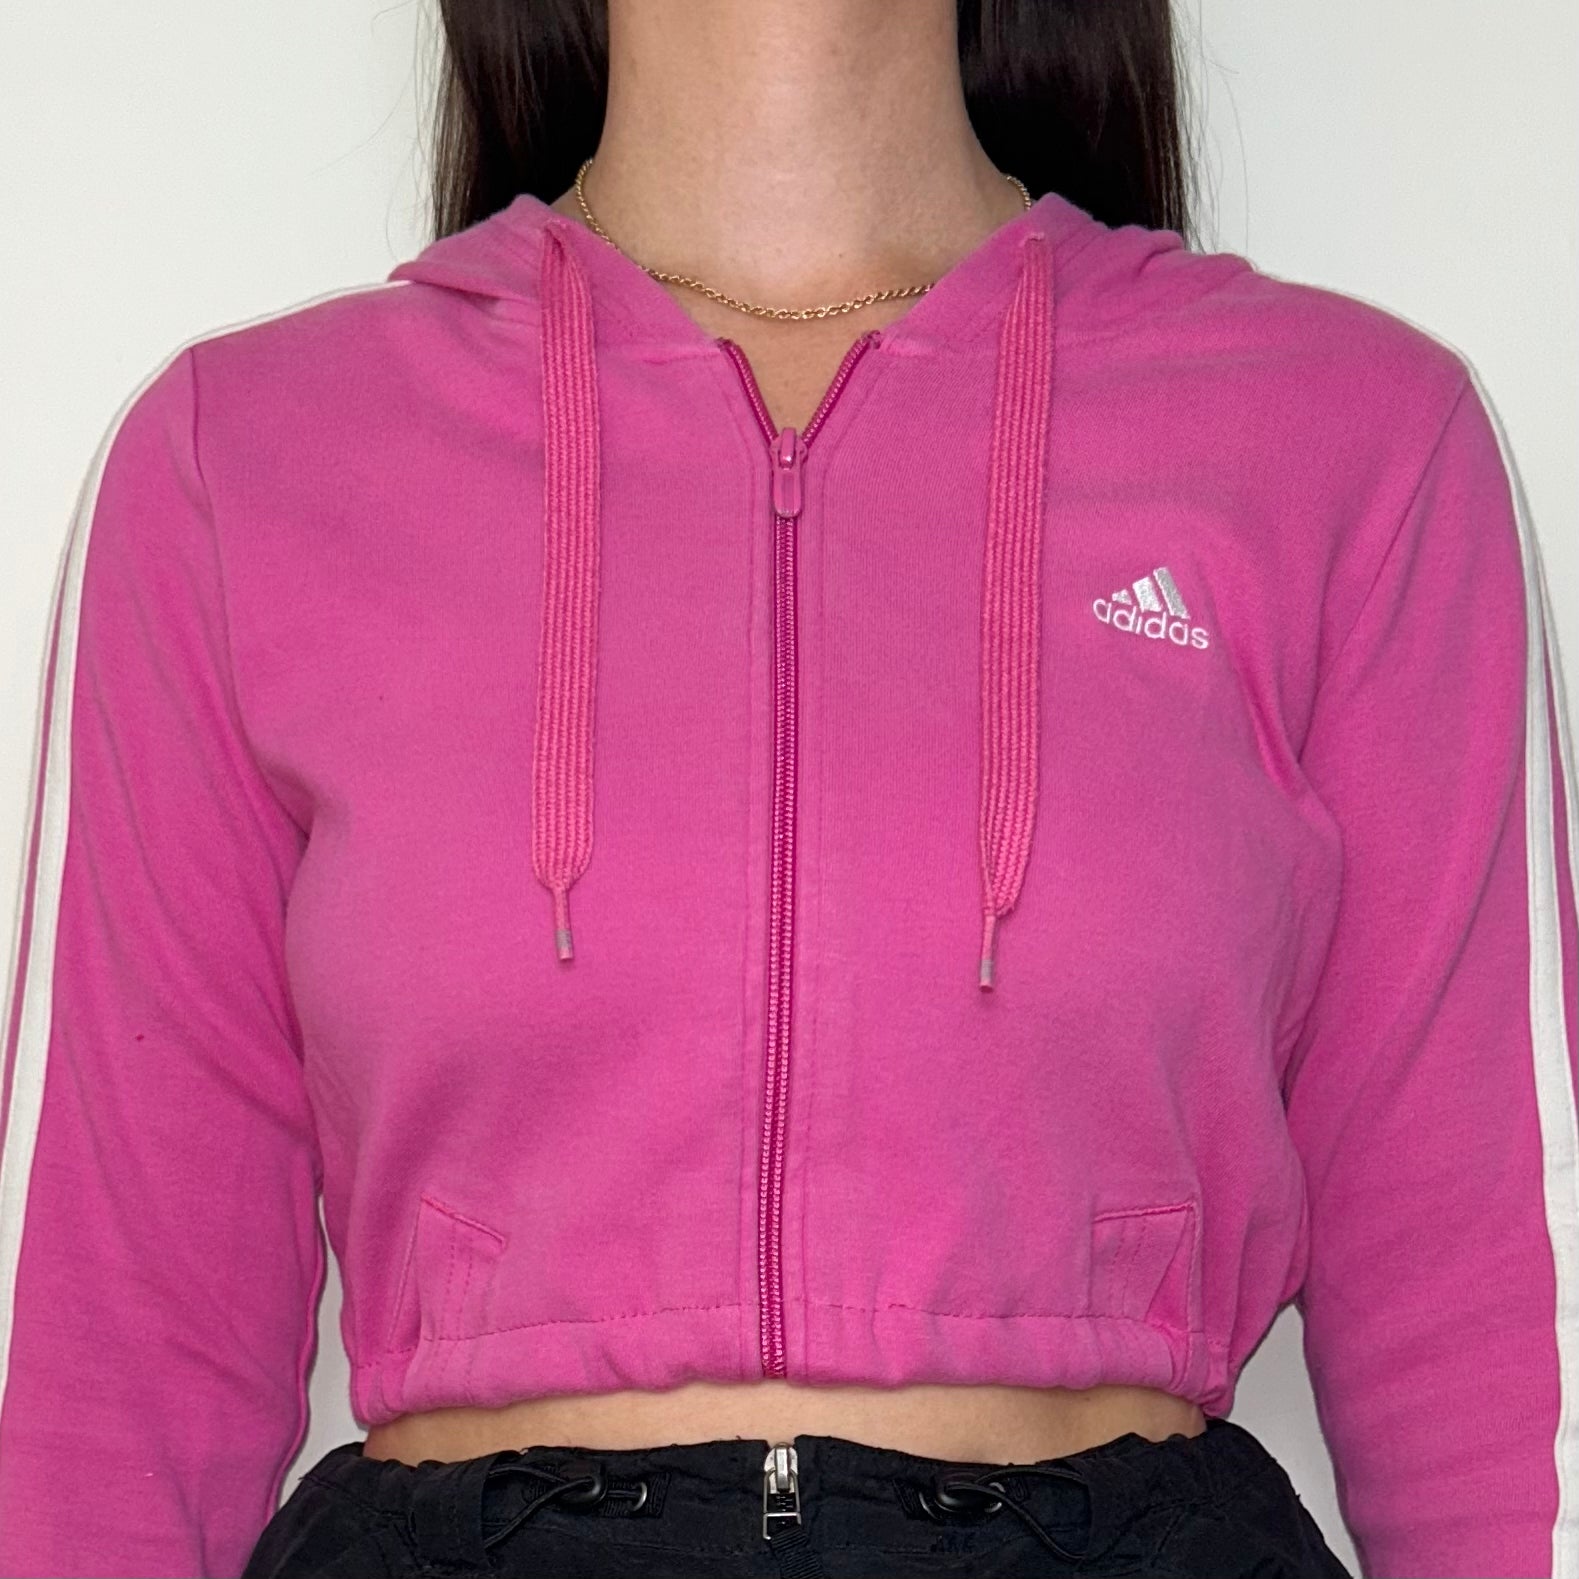 close up of pink zip up hoodie with white adidas logo shown on a model